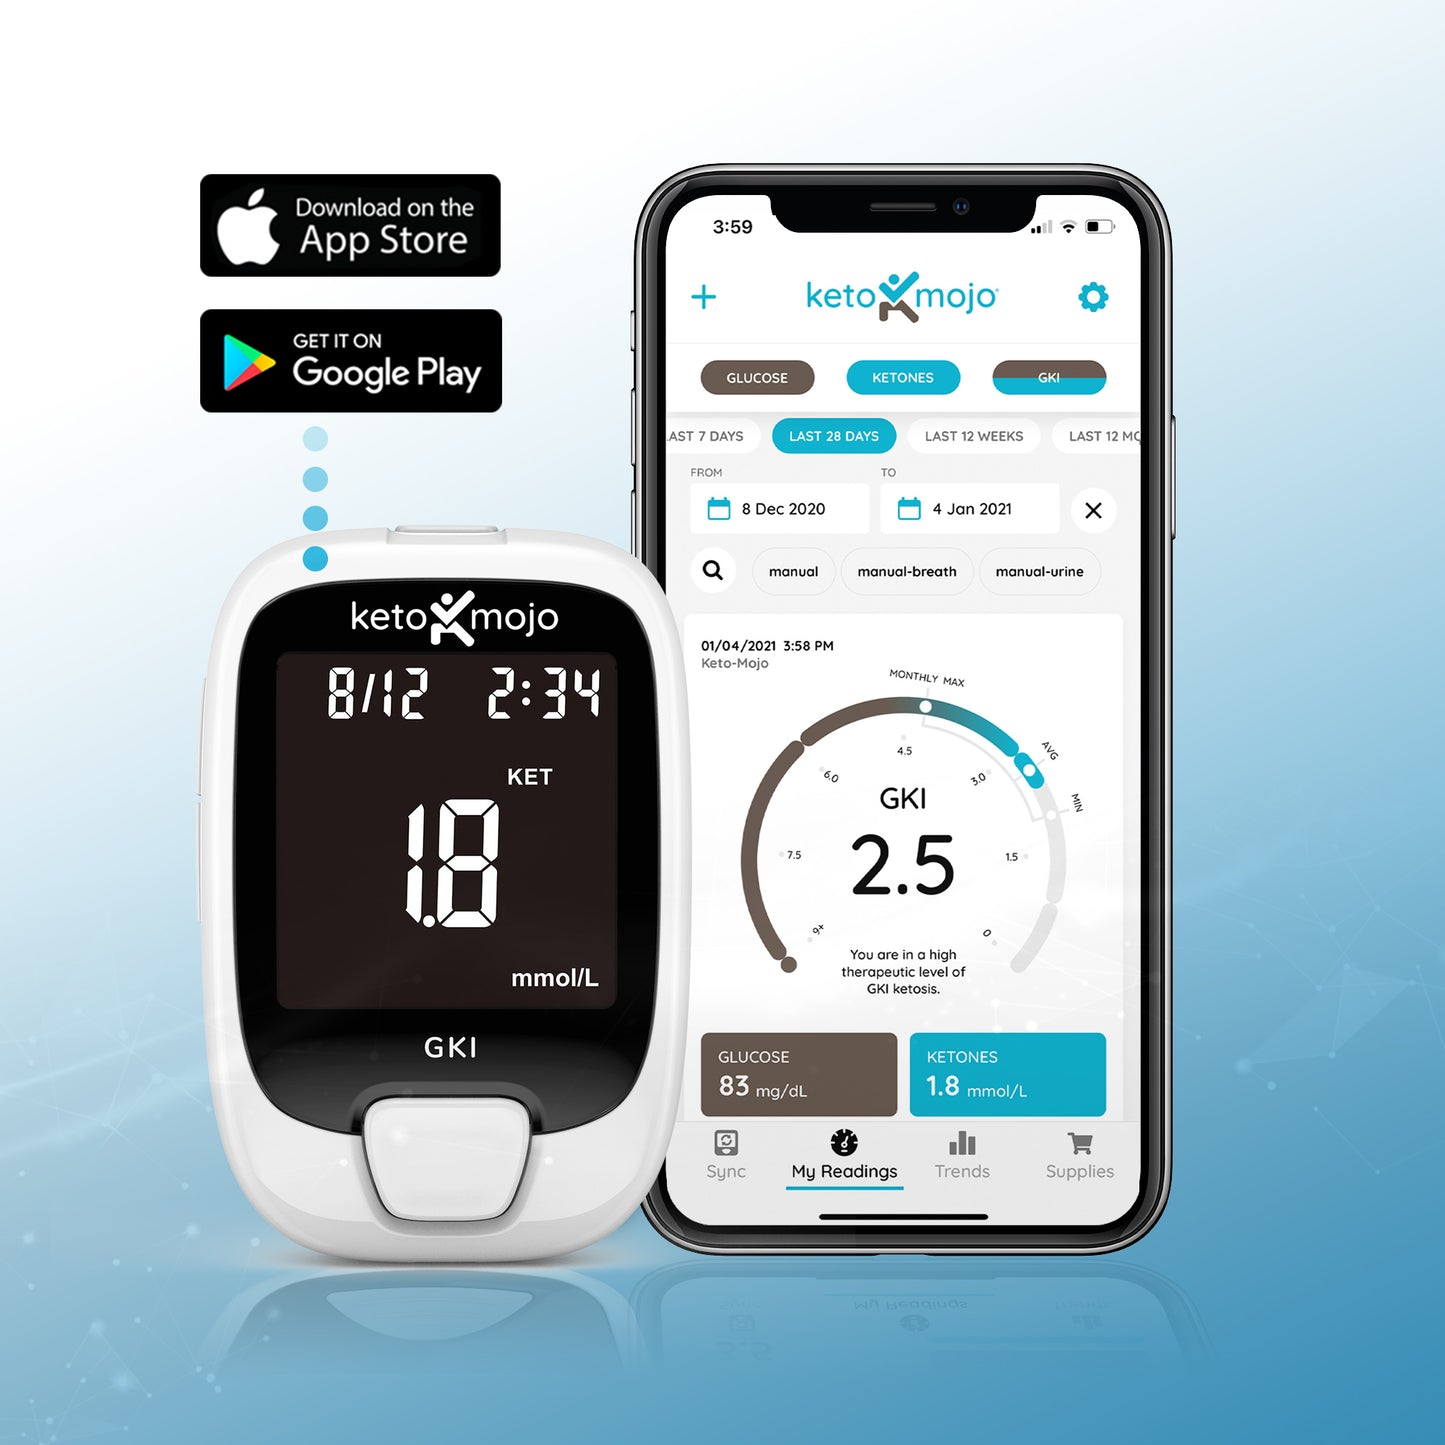 As a Keto-Mojo user, you get free access to the Keto-Mojo Classic App on iOS and Android.  The Bluetooth integration is a seamless connection from your keto meter to the app without any additional formatting or settings needed. This allows you easy access to sync your blood glucose and keto test result from the Keto-Mojo meter to your smartphone.  What a great way to track and monitor your progress!  